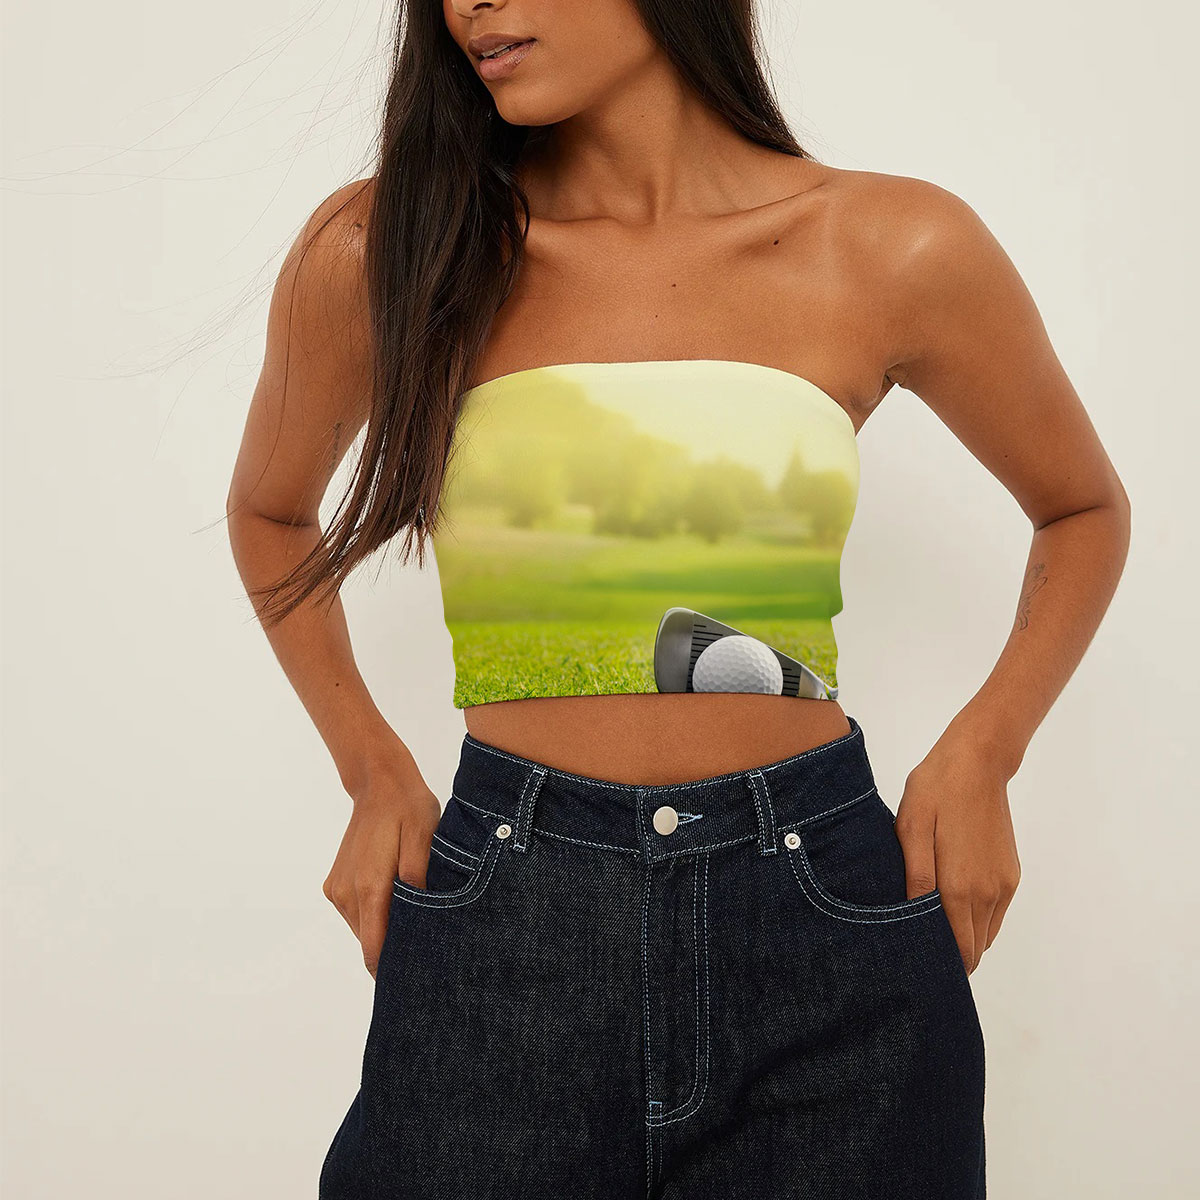 Golf Tools On Grass Tube Top